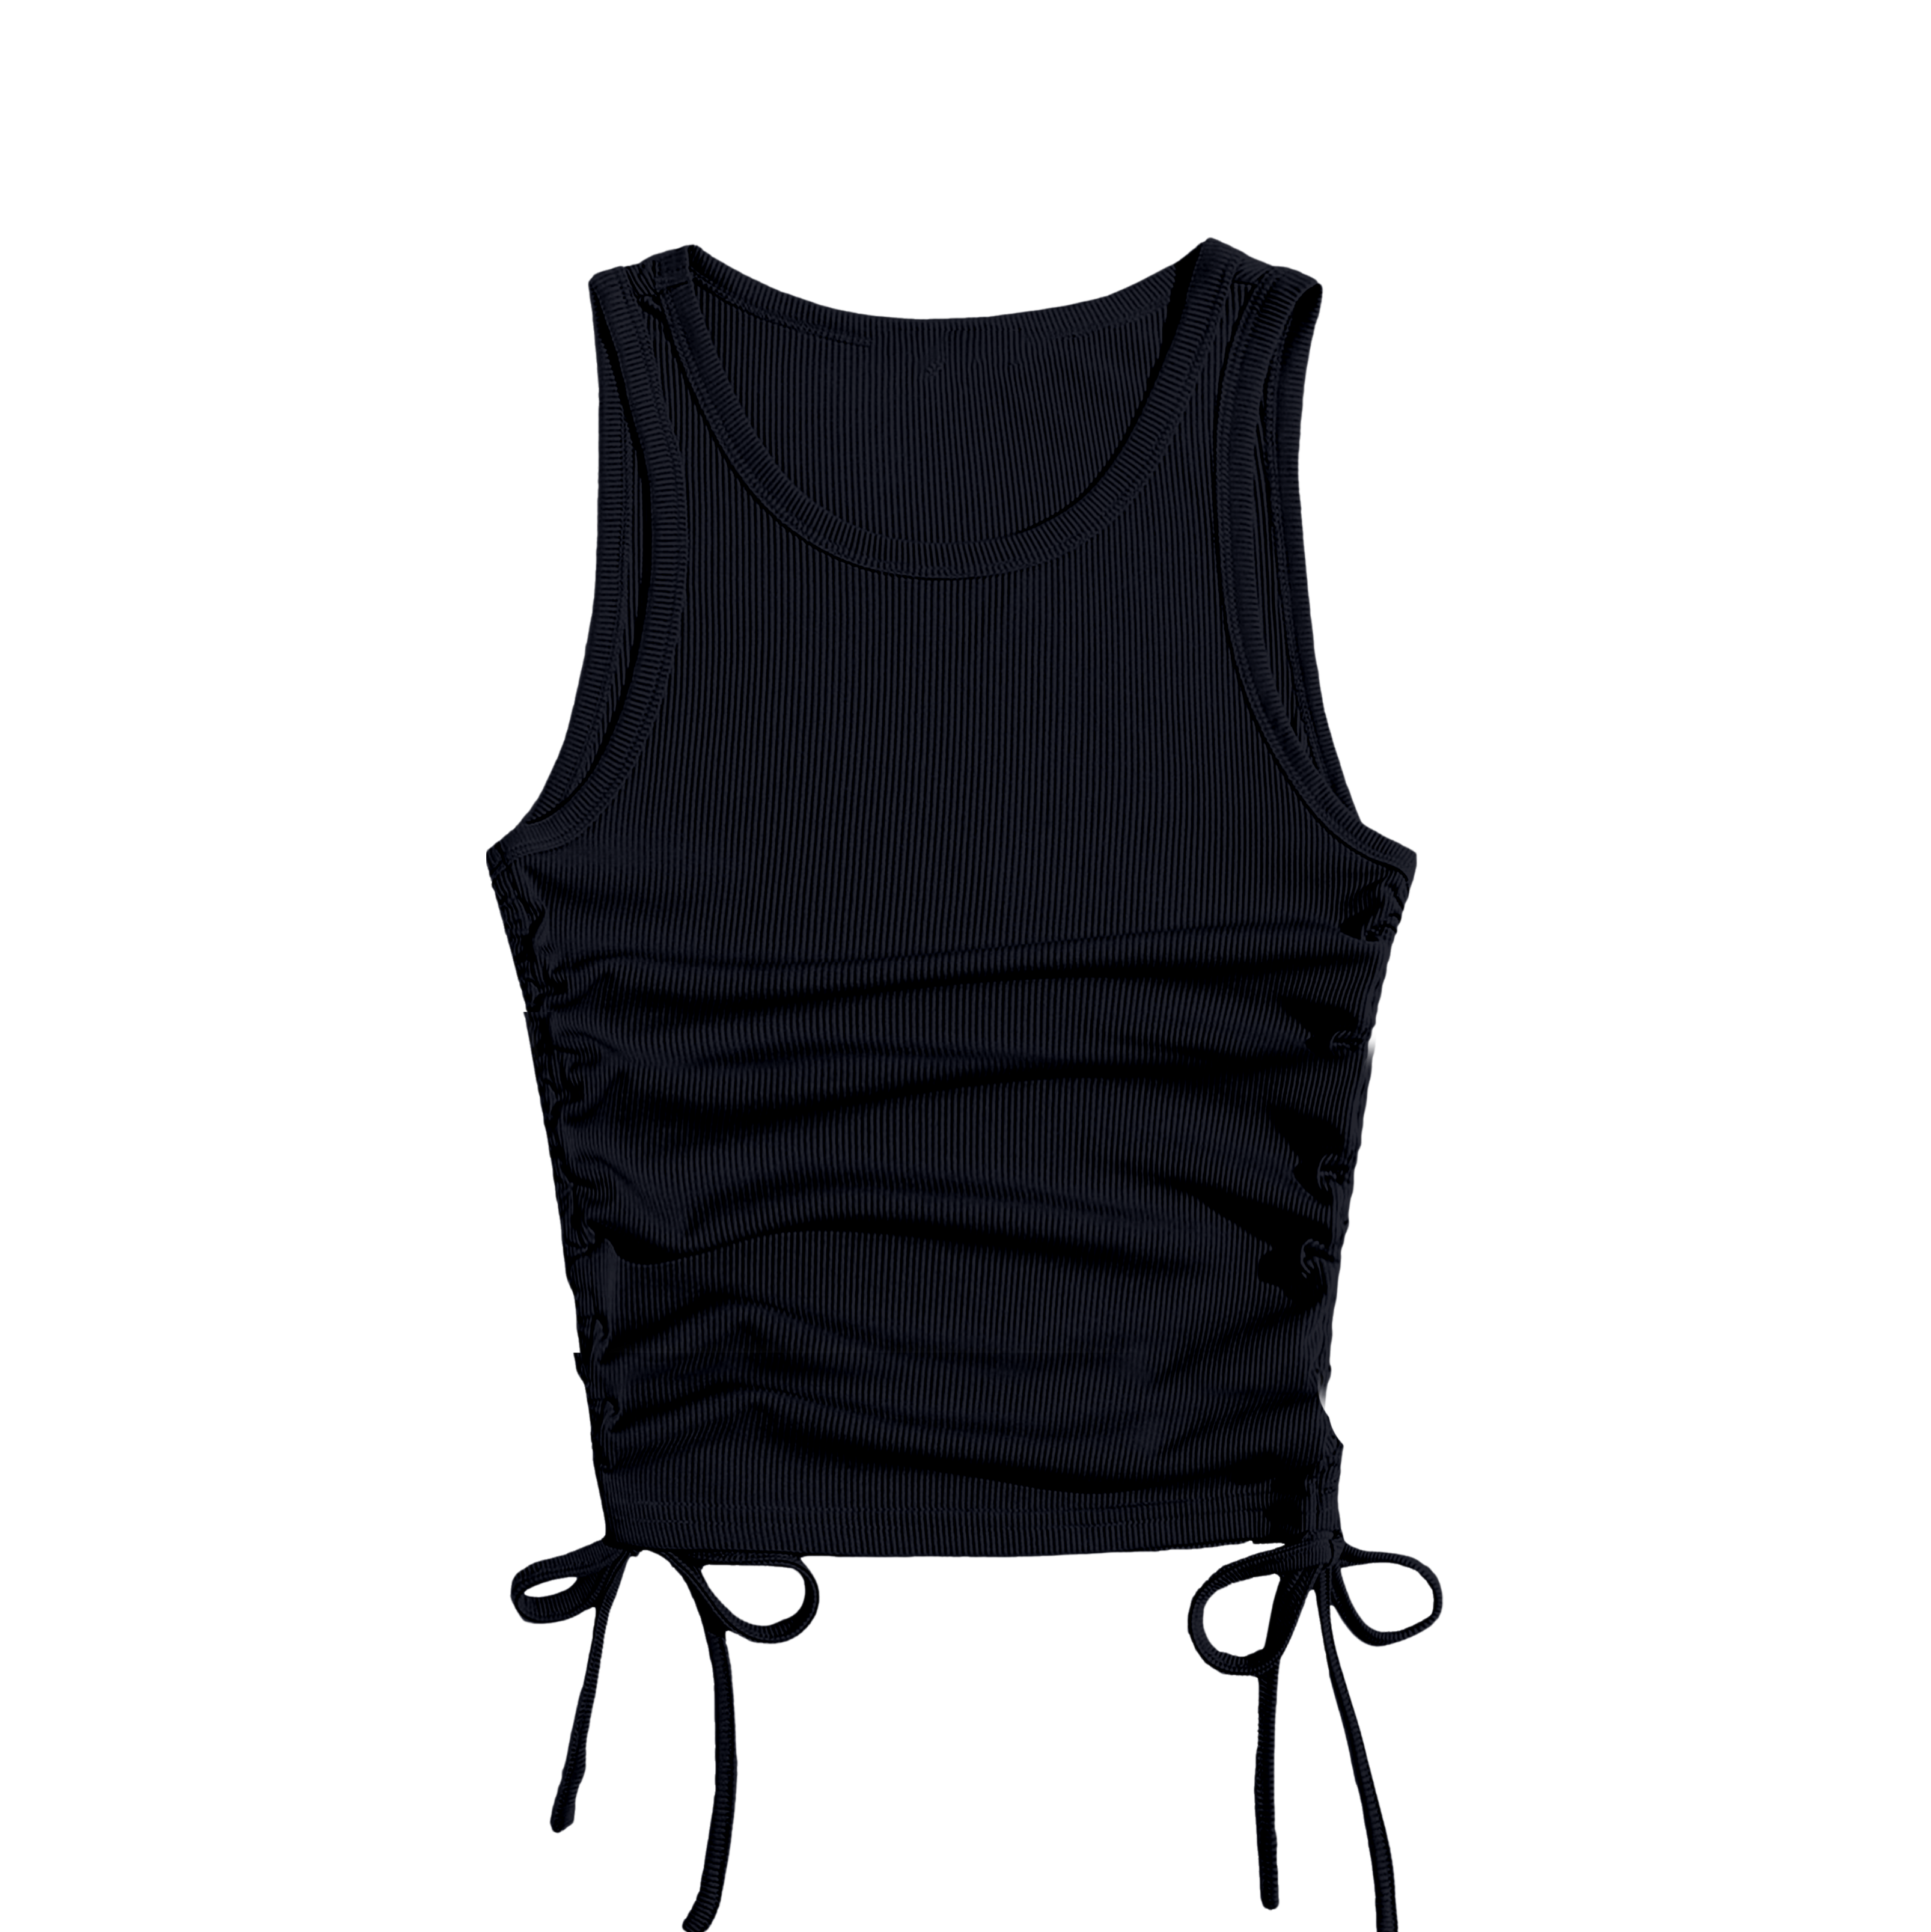 Full Topanga Tank (Ruched Tank) Solid Color